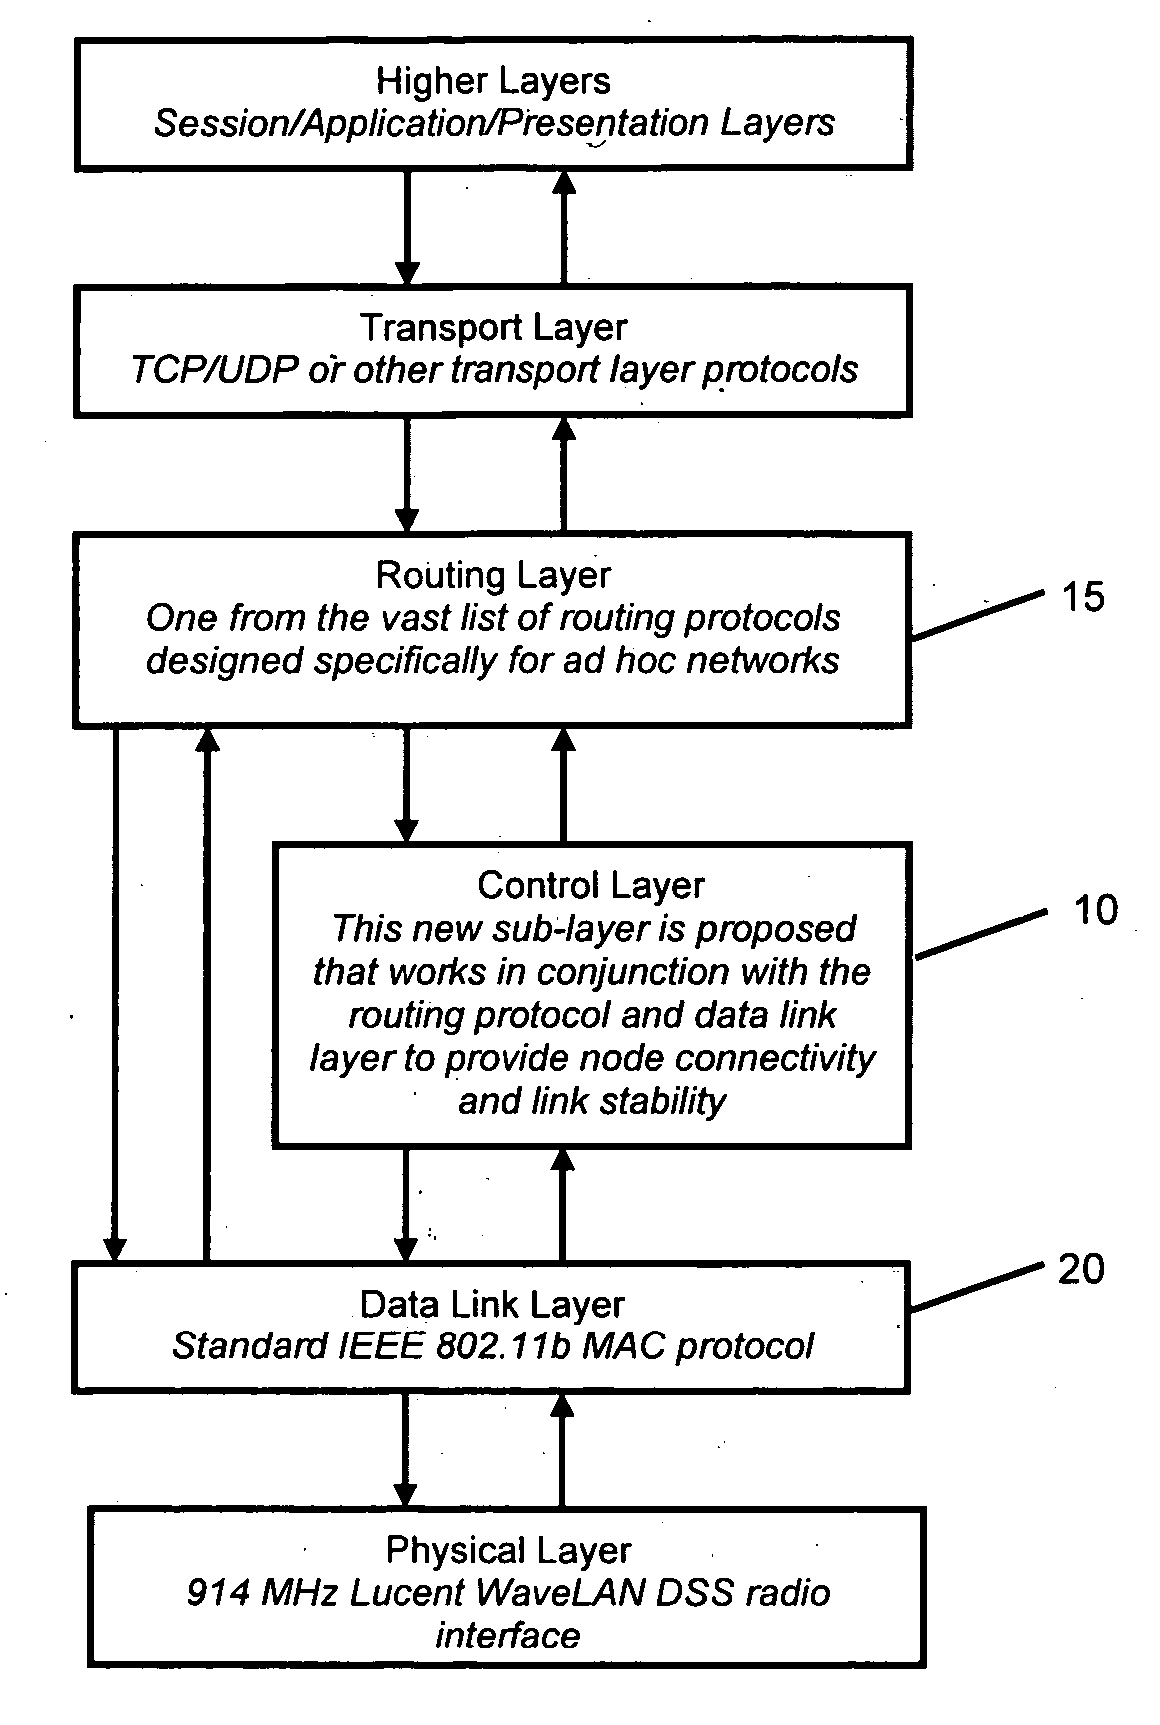 A System and Method to Assure Node Connectivity in an Ad Hoc Network